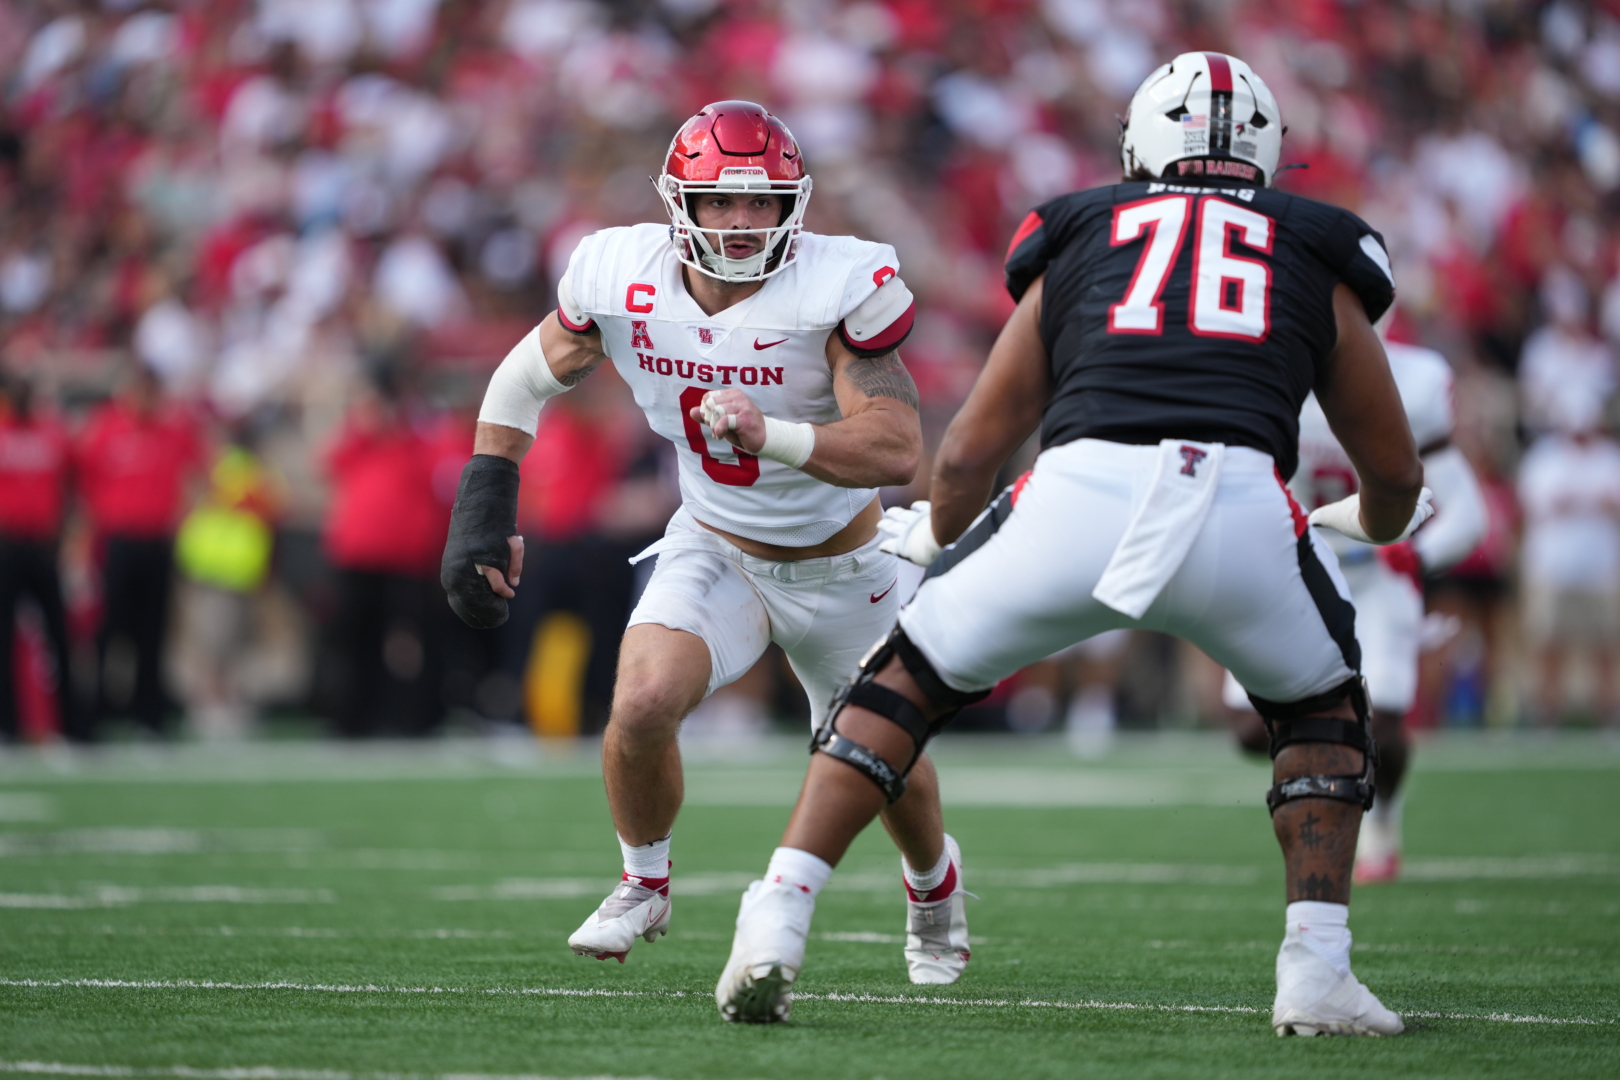 UH defensive end Derek Parish is coming off an AAC record 4.5 sack performance against Texas Tech, earning him the conference's Defensive Player of the Week honors. | Courtesy of UH athletics